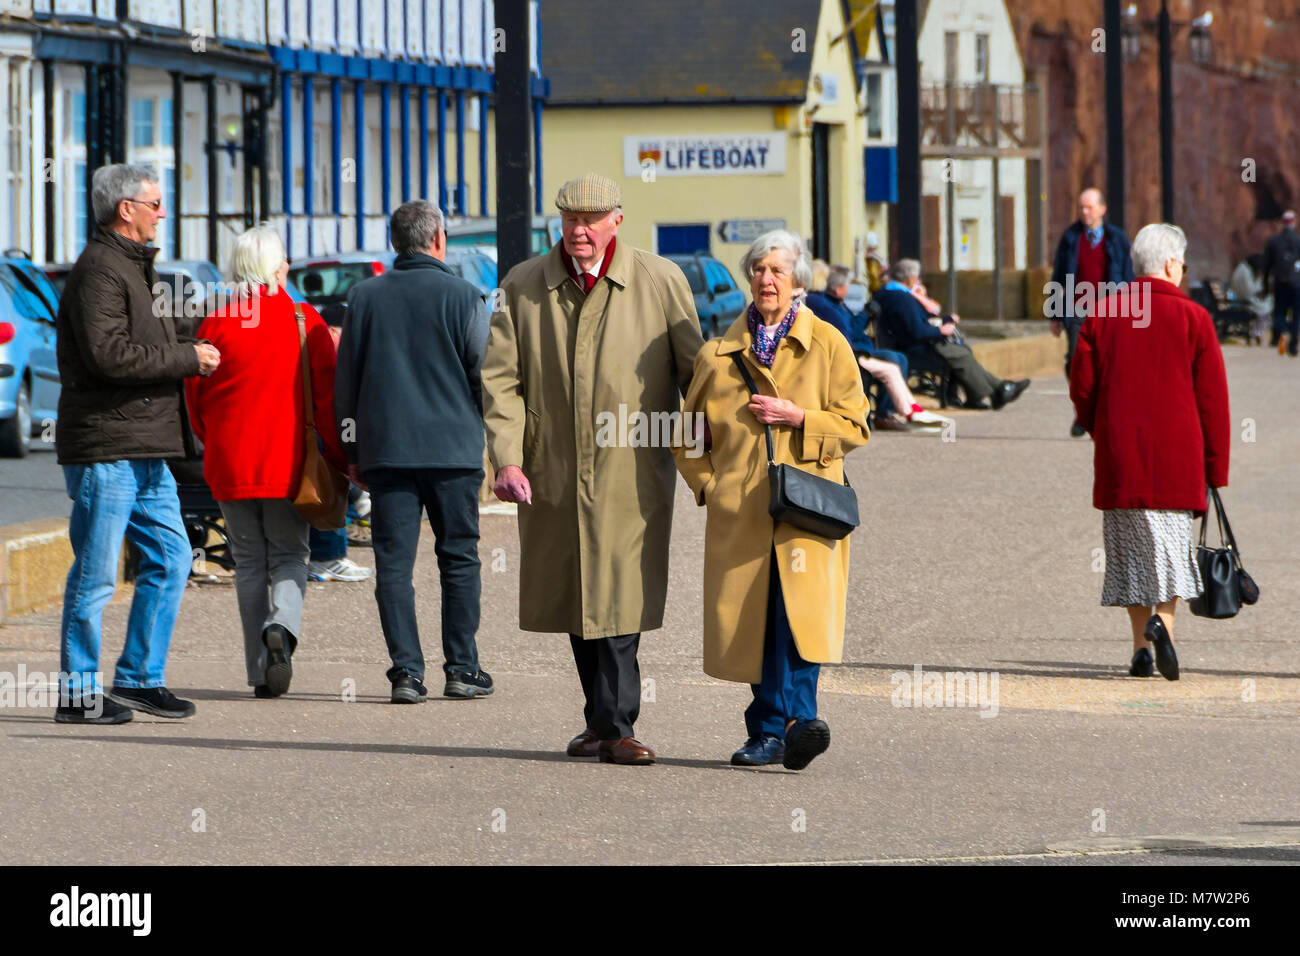 Sidmouth, Devon, UK.  13th March 2018.  UK Weather.  Visitors and residents enjoying a walk along the seafront at the seaside town of Sidmouth in Devon on a warm sunny spring afternoon.  Picture Credit: Graham Hunt/Alamy Live News. Stock Photo